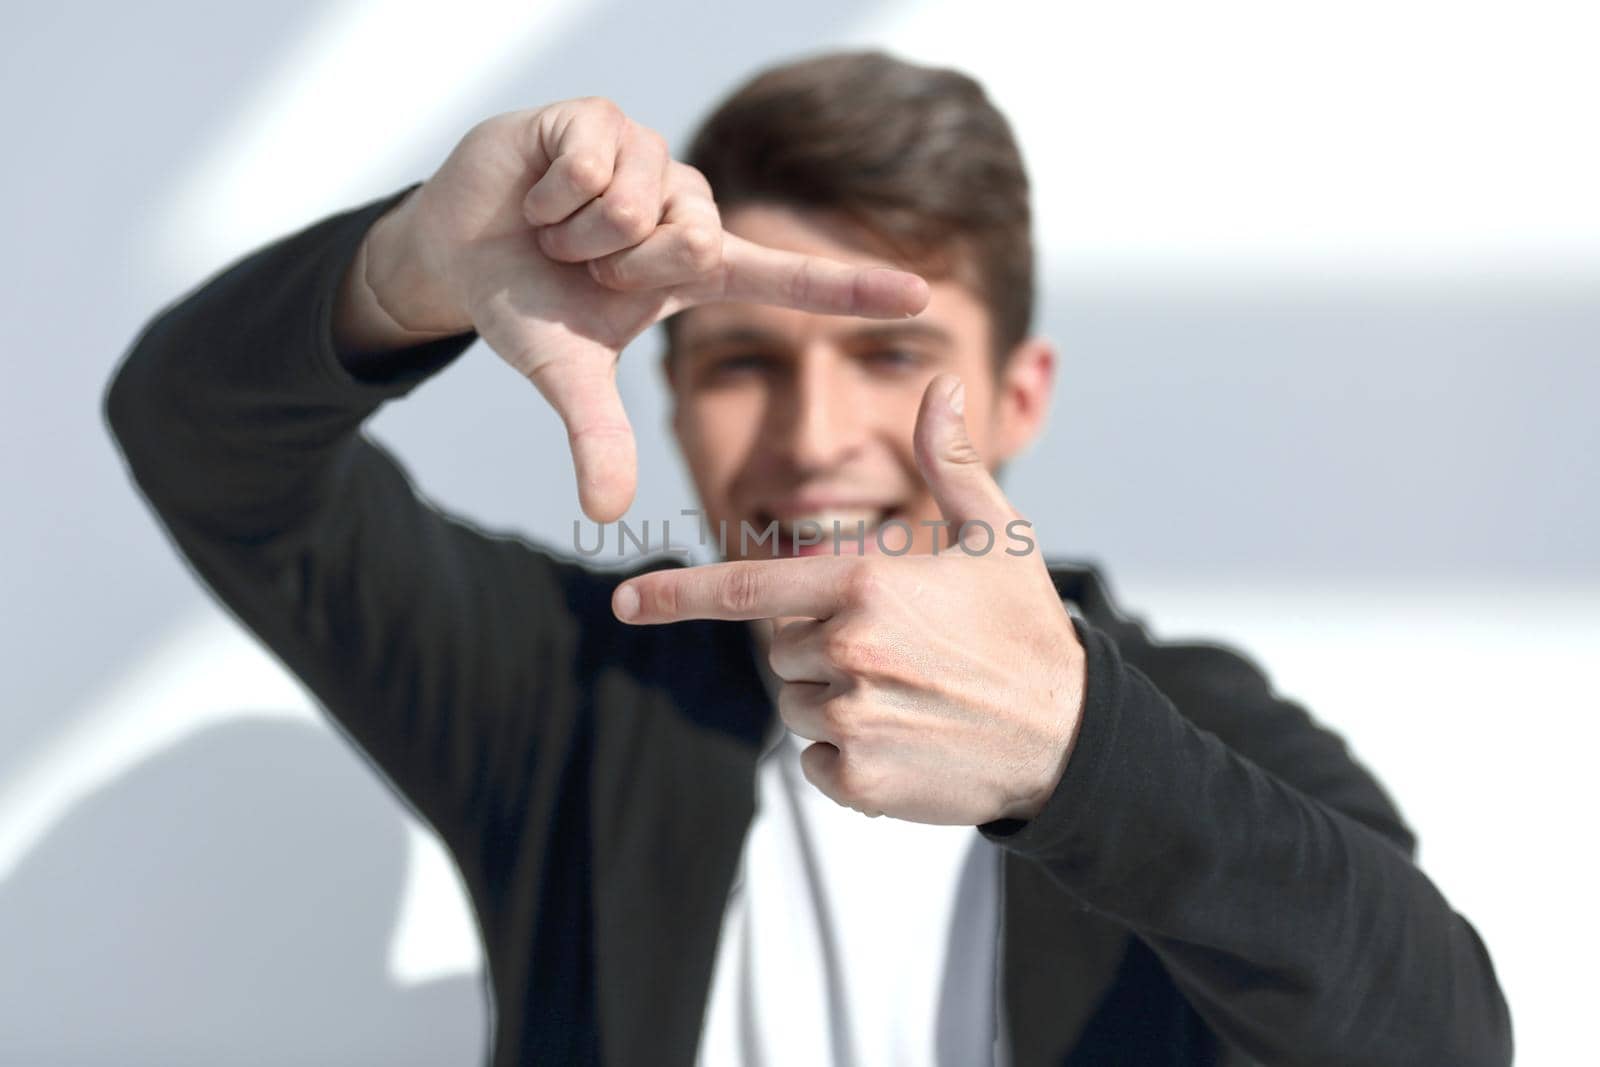 modern guy looks into the frame formed by his hands.photo on light background